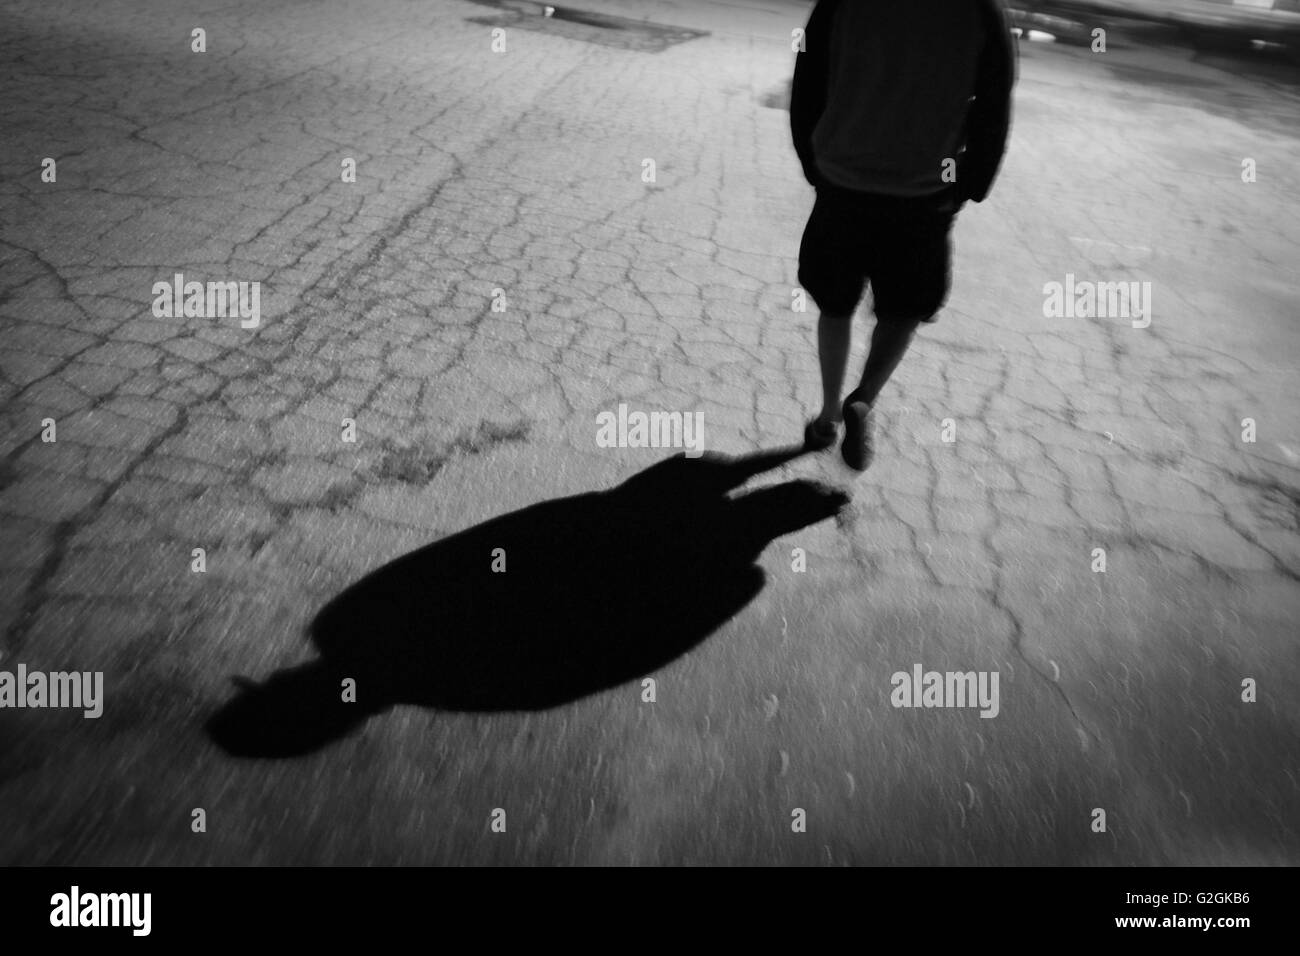 Man Walking on Asphalt at Night, Rear View with Shadow Stock Photo